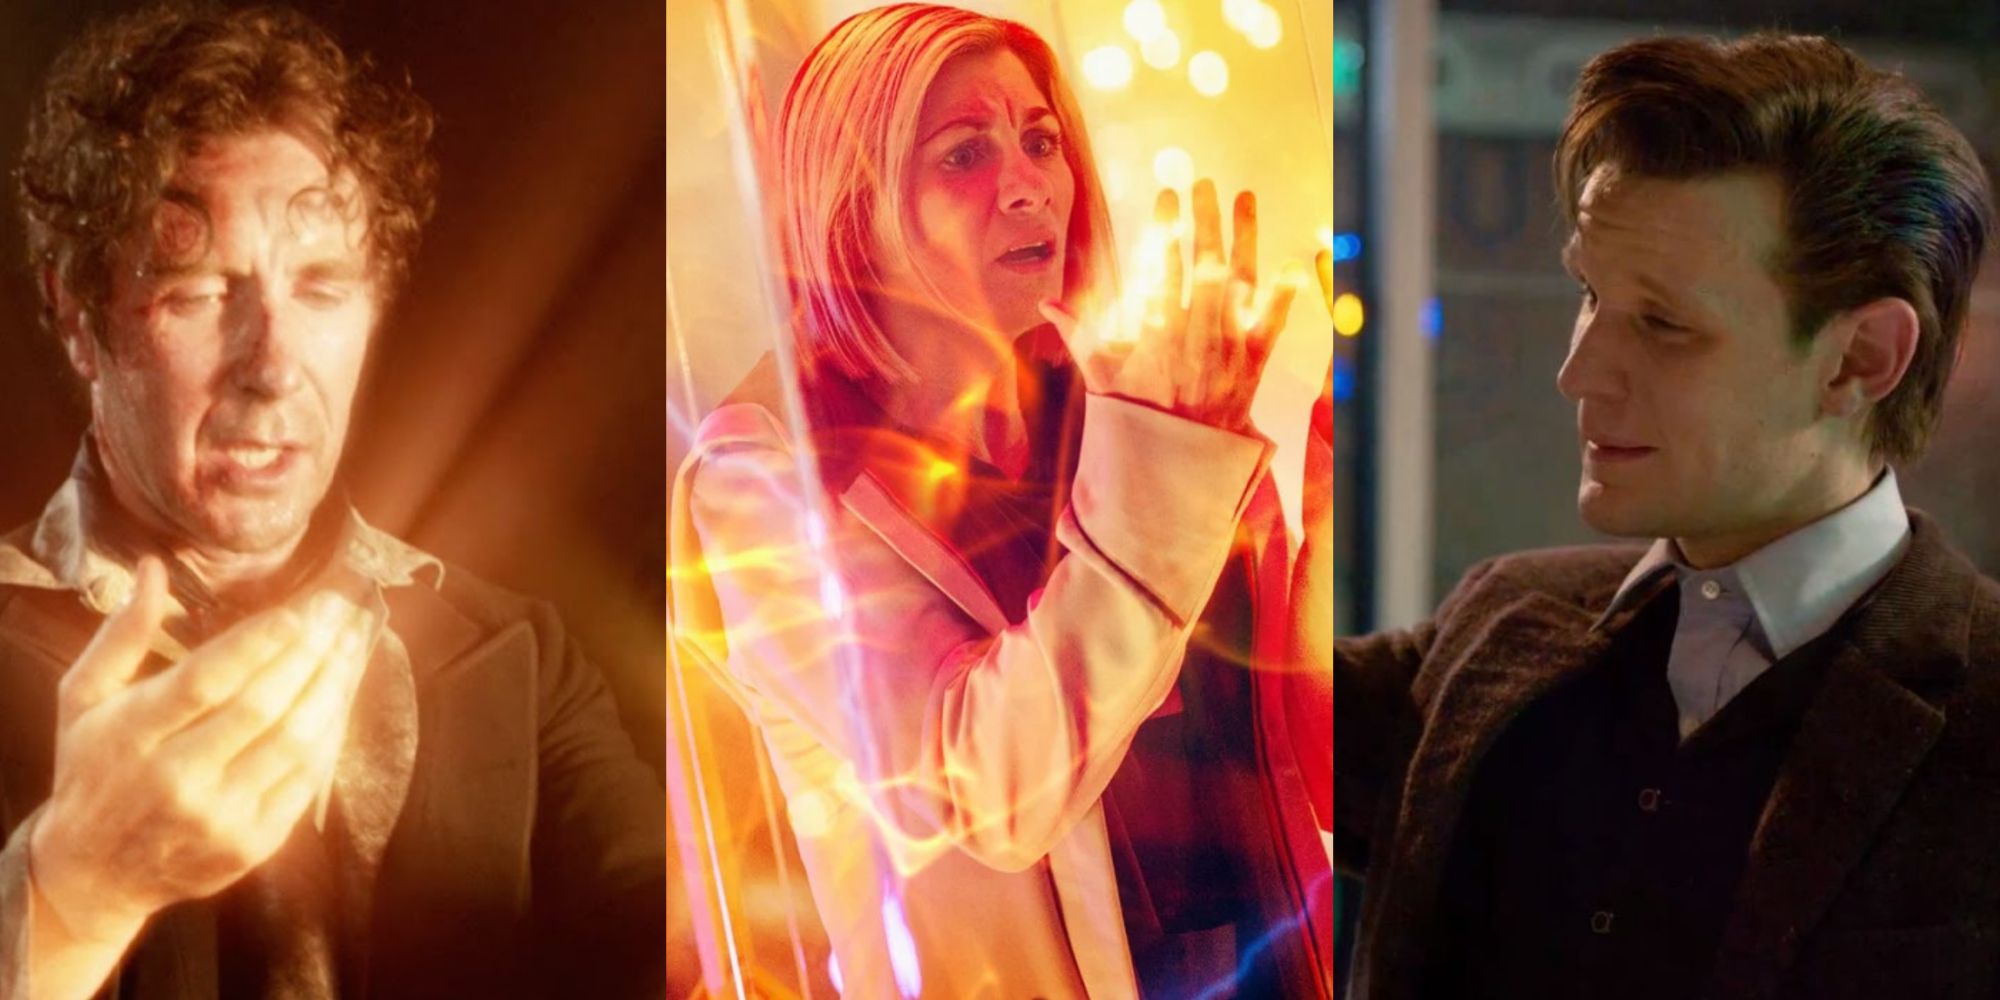 Doctor Who: Every Doctor's Regeneration Ranked From Least To Most Painful